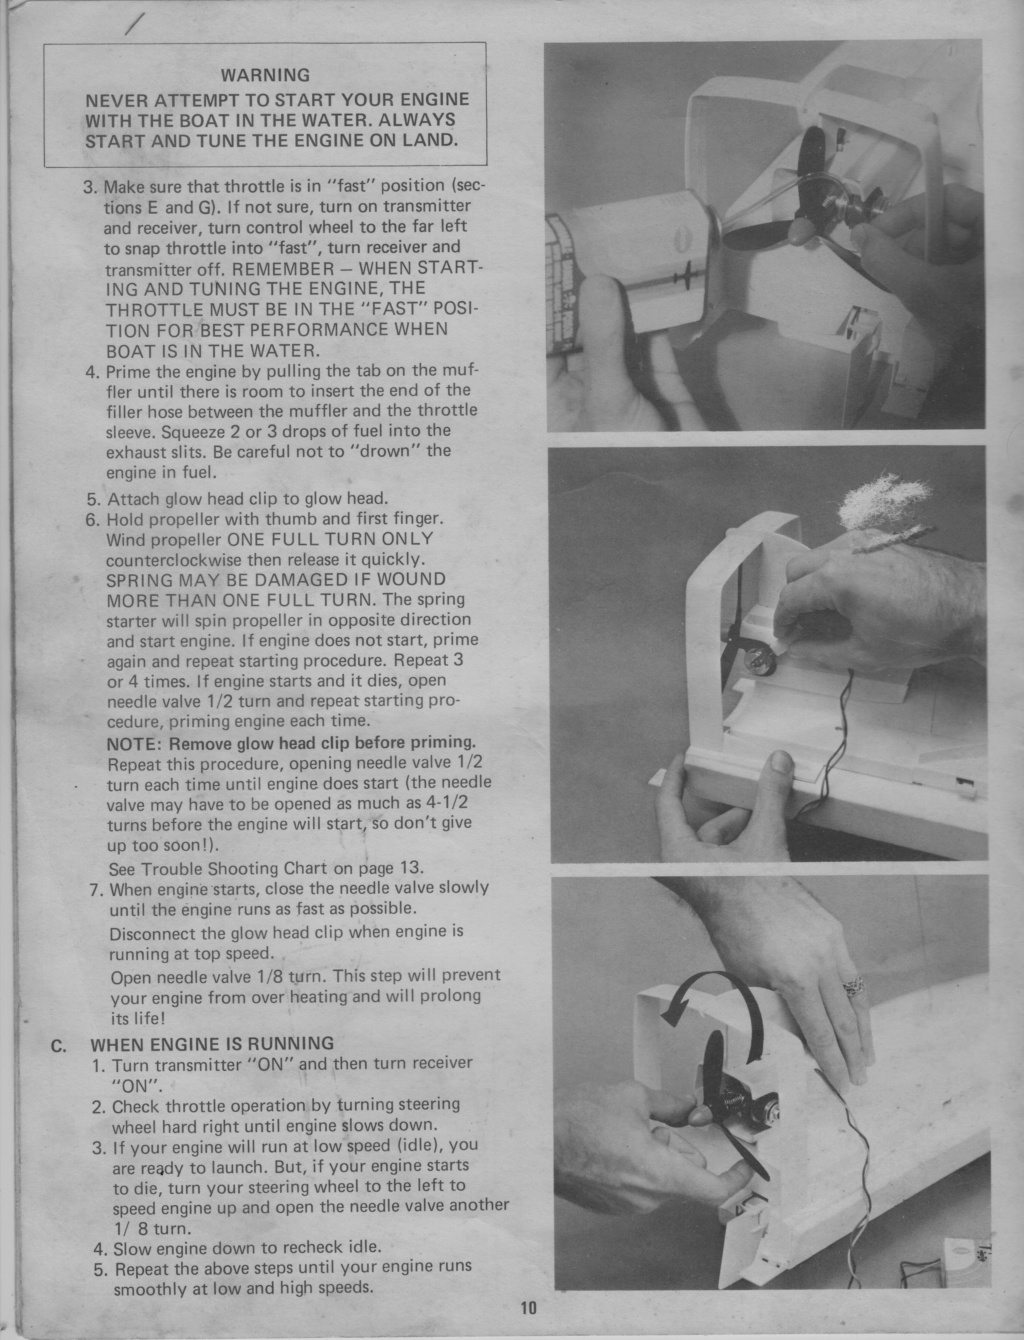 Hydro Blaster pictures and manual scans . Hydro_20